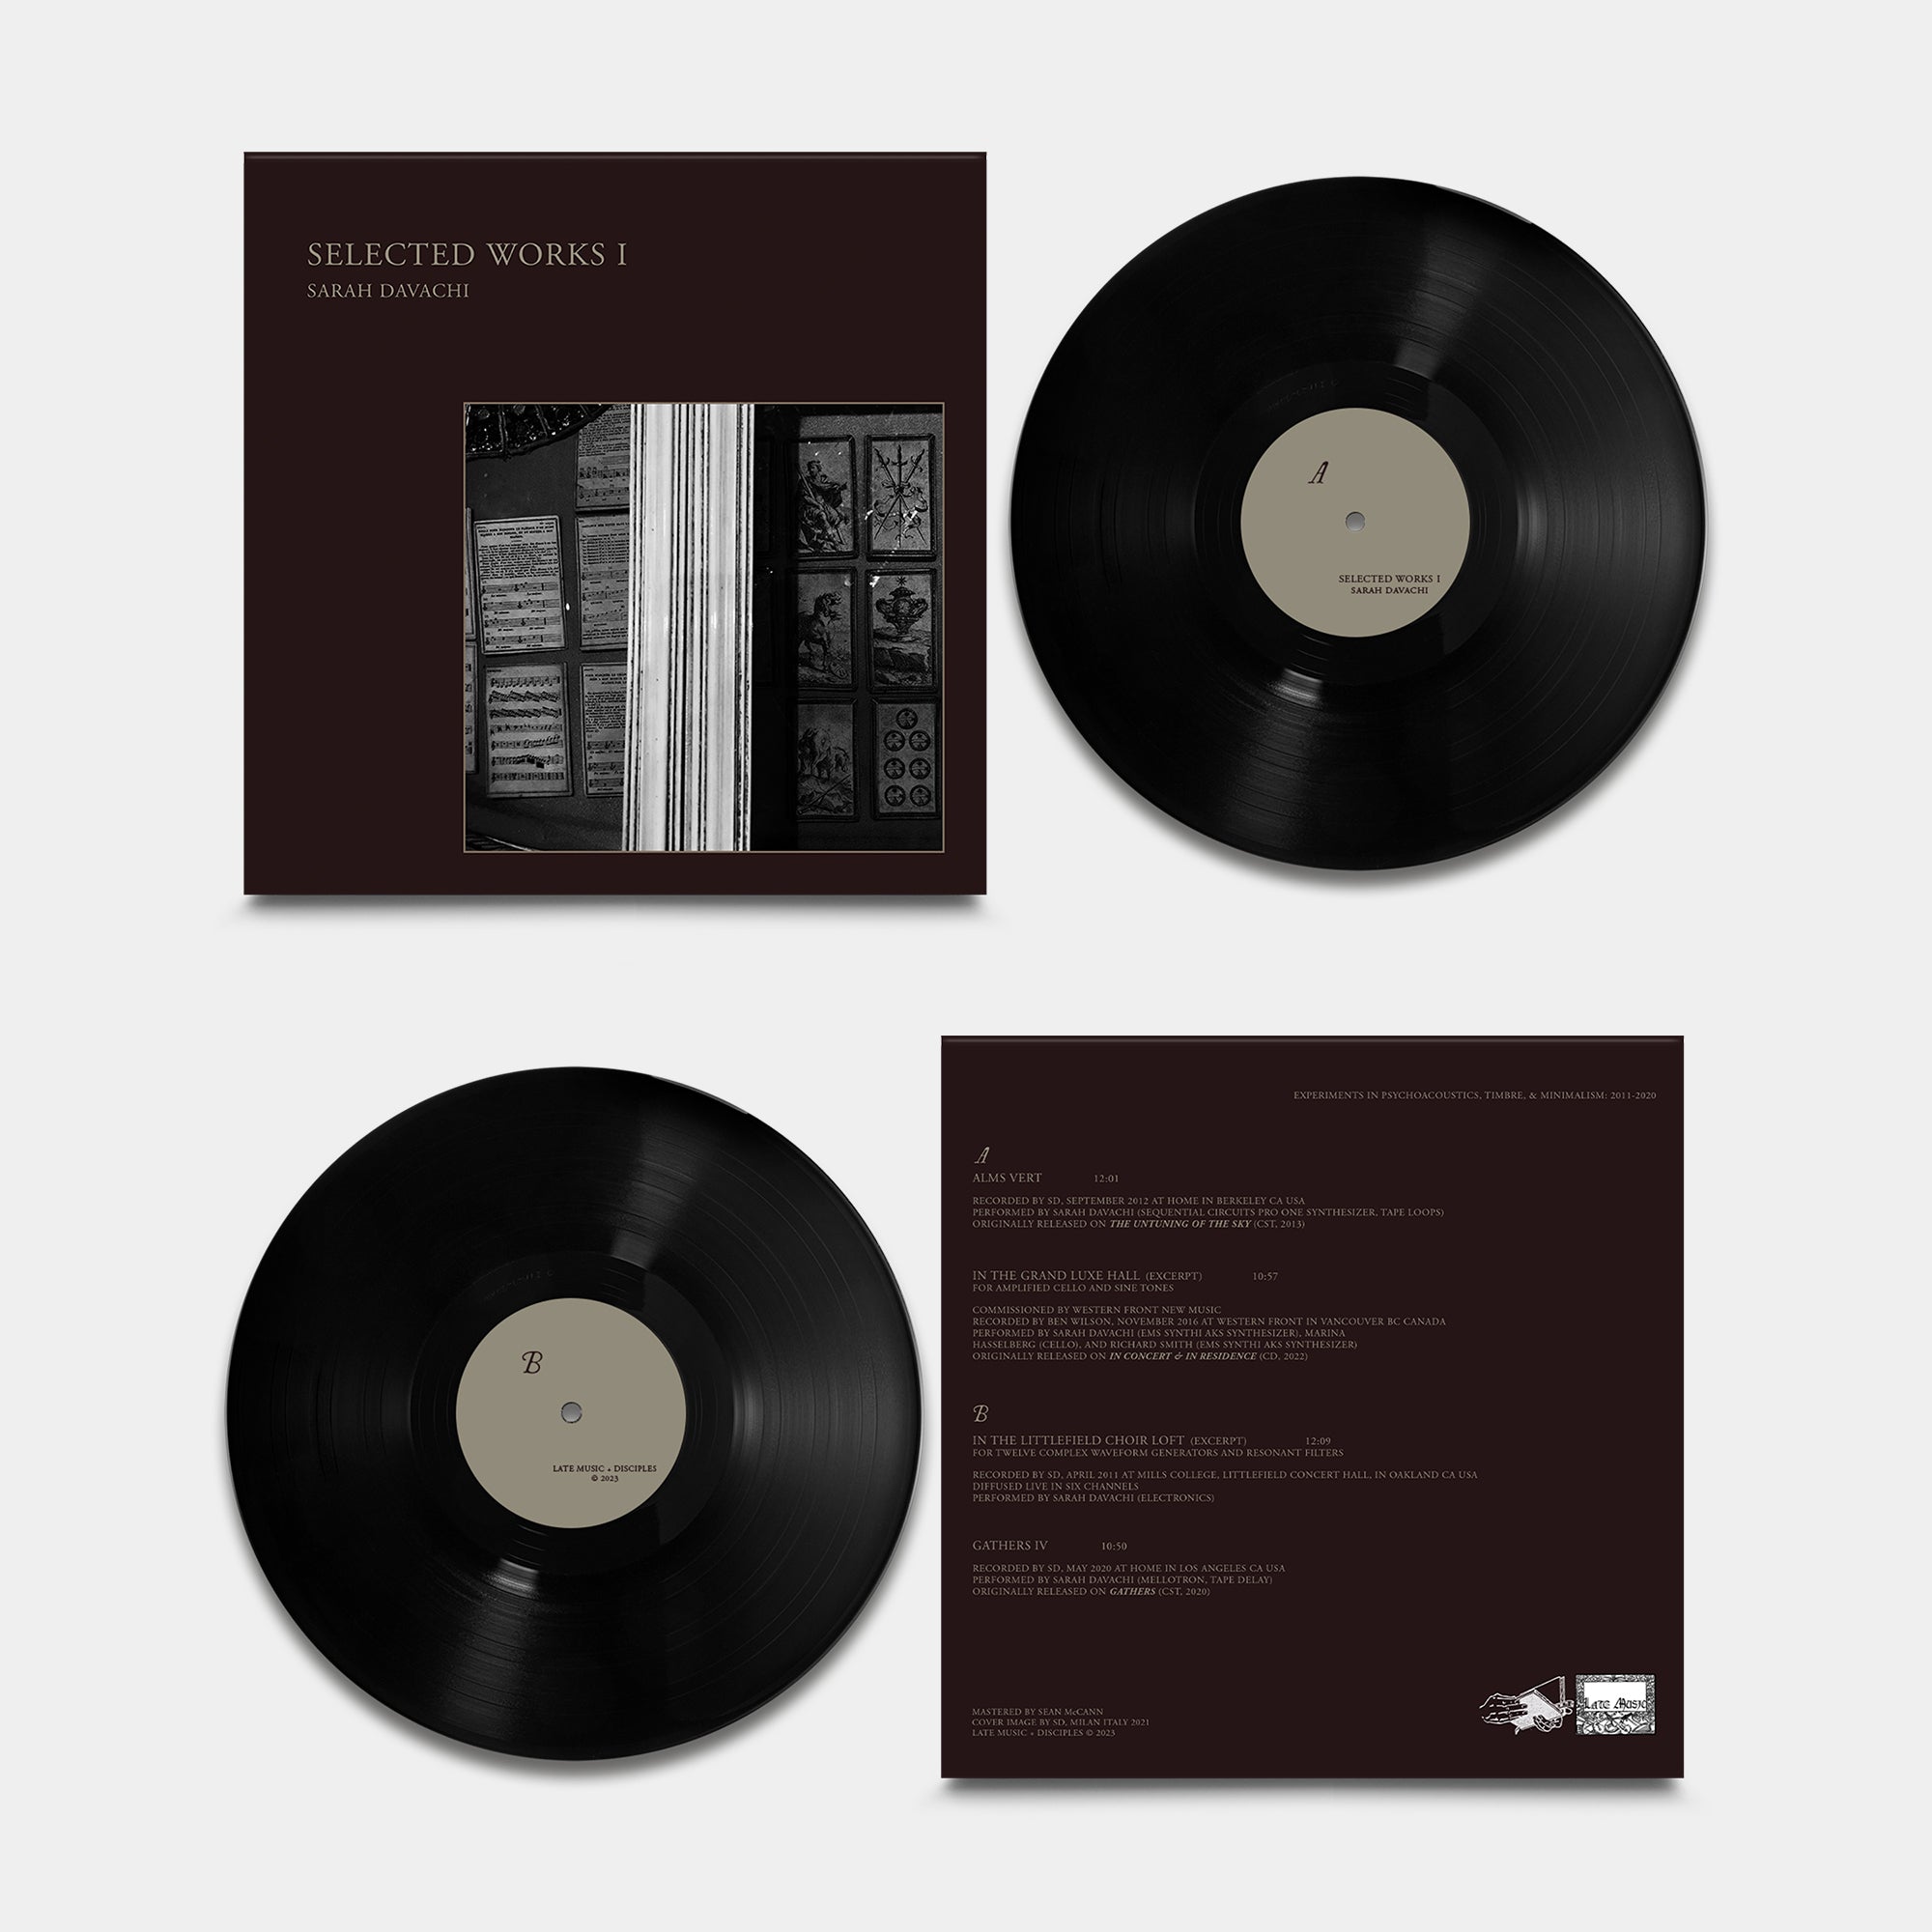 SARAH DAVACHI - Selected Works I (Vinyl LP) – Flying Out